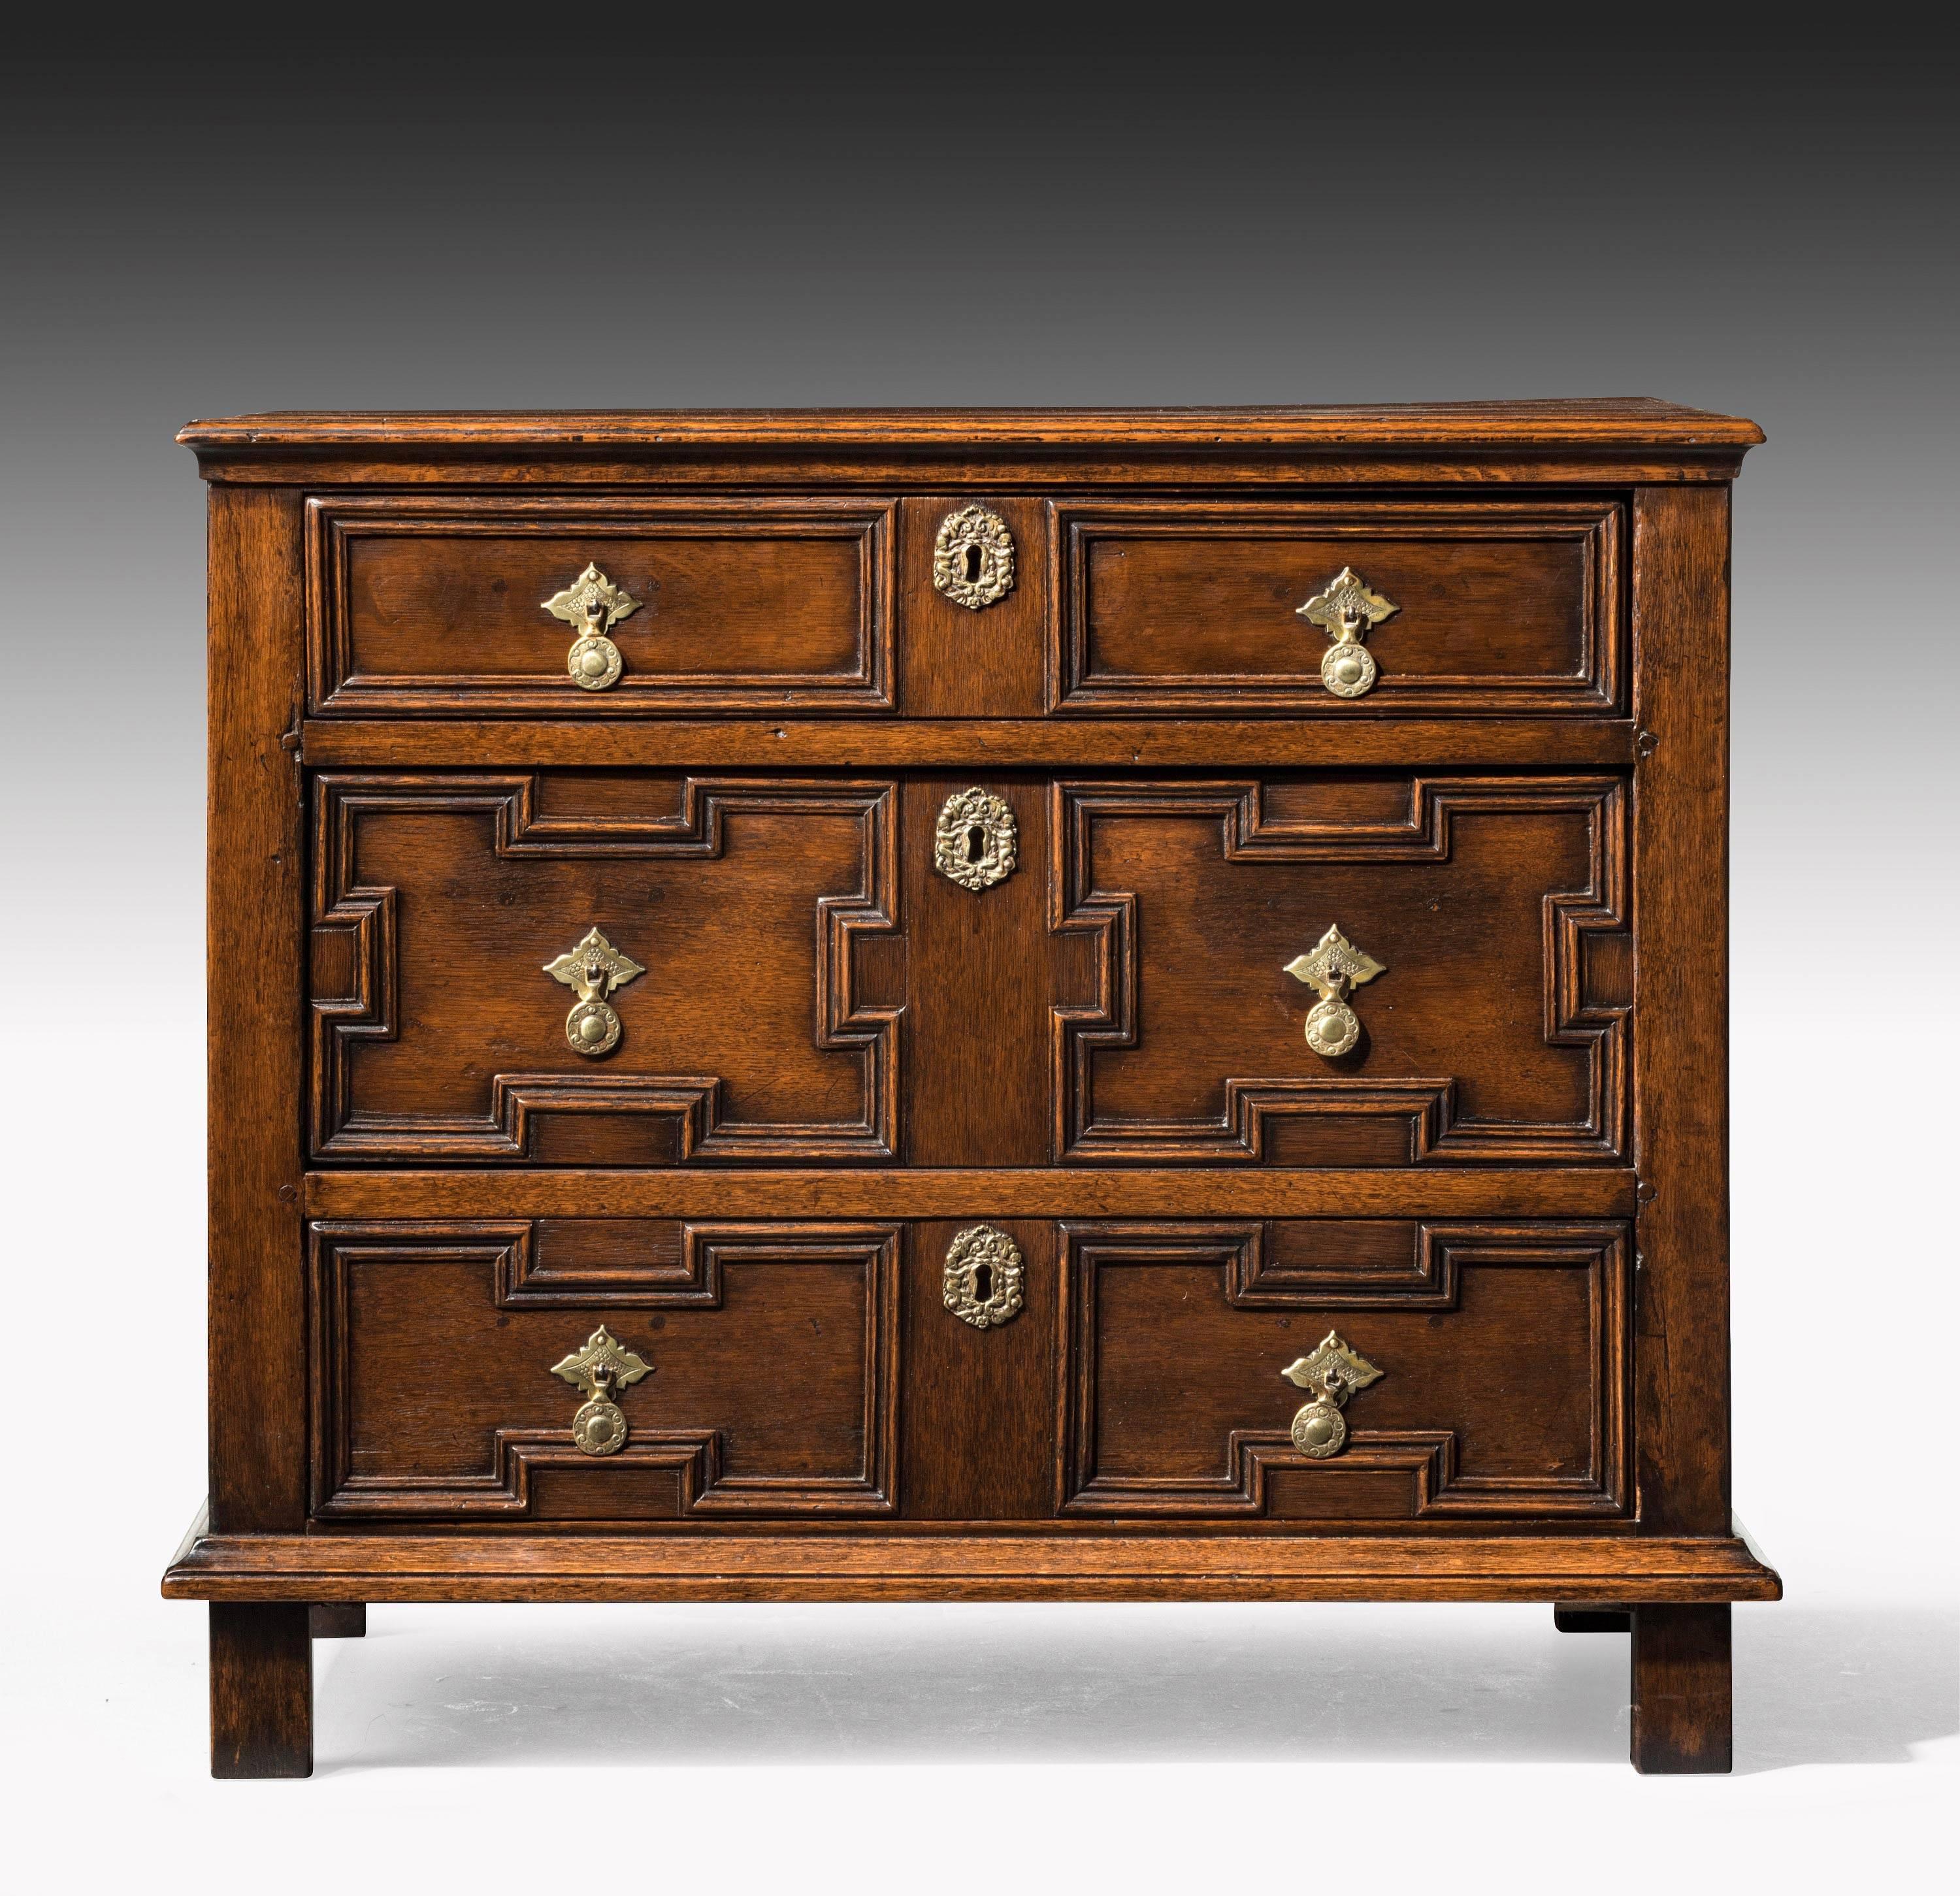 A good small late 17th century chest of drawers with geometrically shaped fronts to the drawers and unusually four-panel sections to the ends. On original square feet.